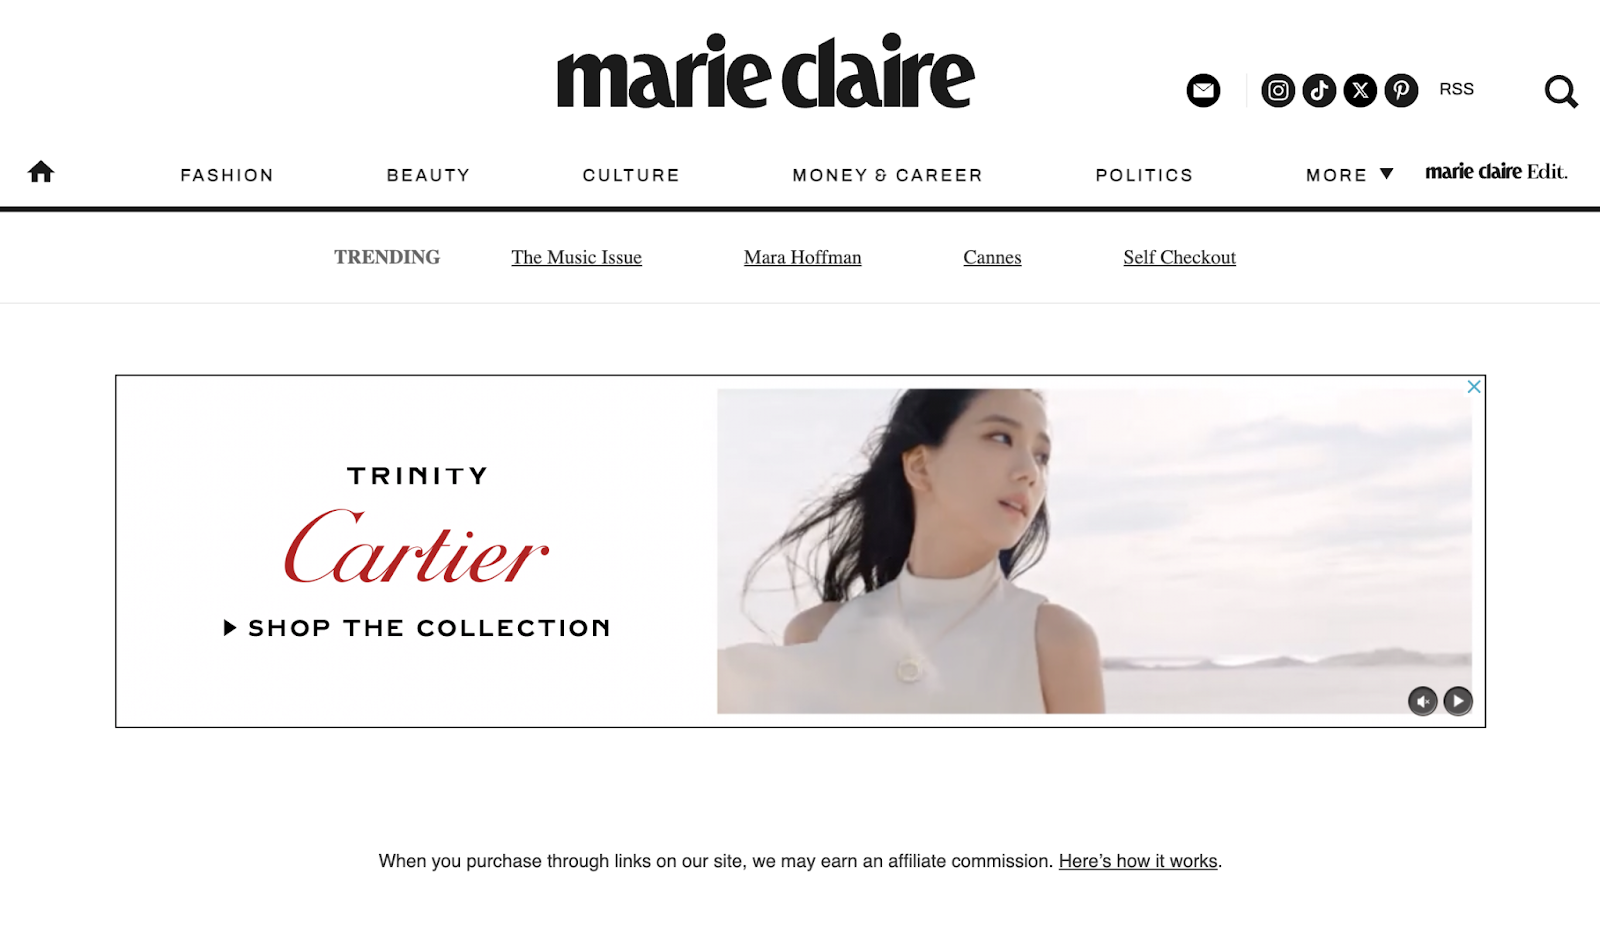 Cartier has a display ad near the top of a marie claire magazine webpage